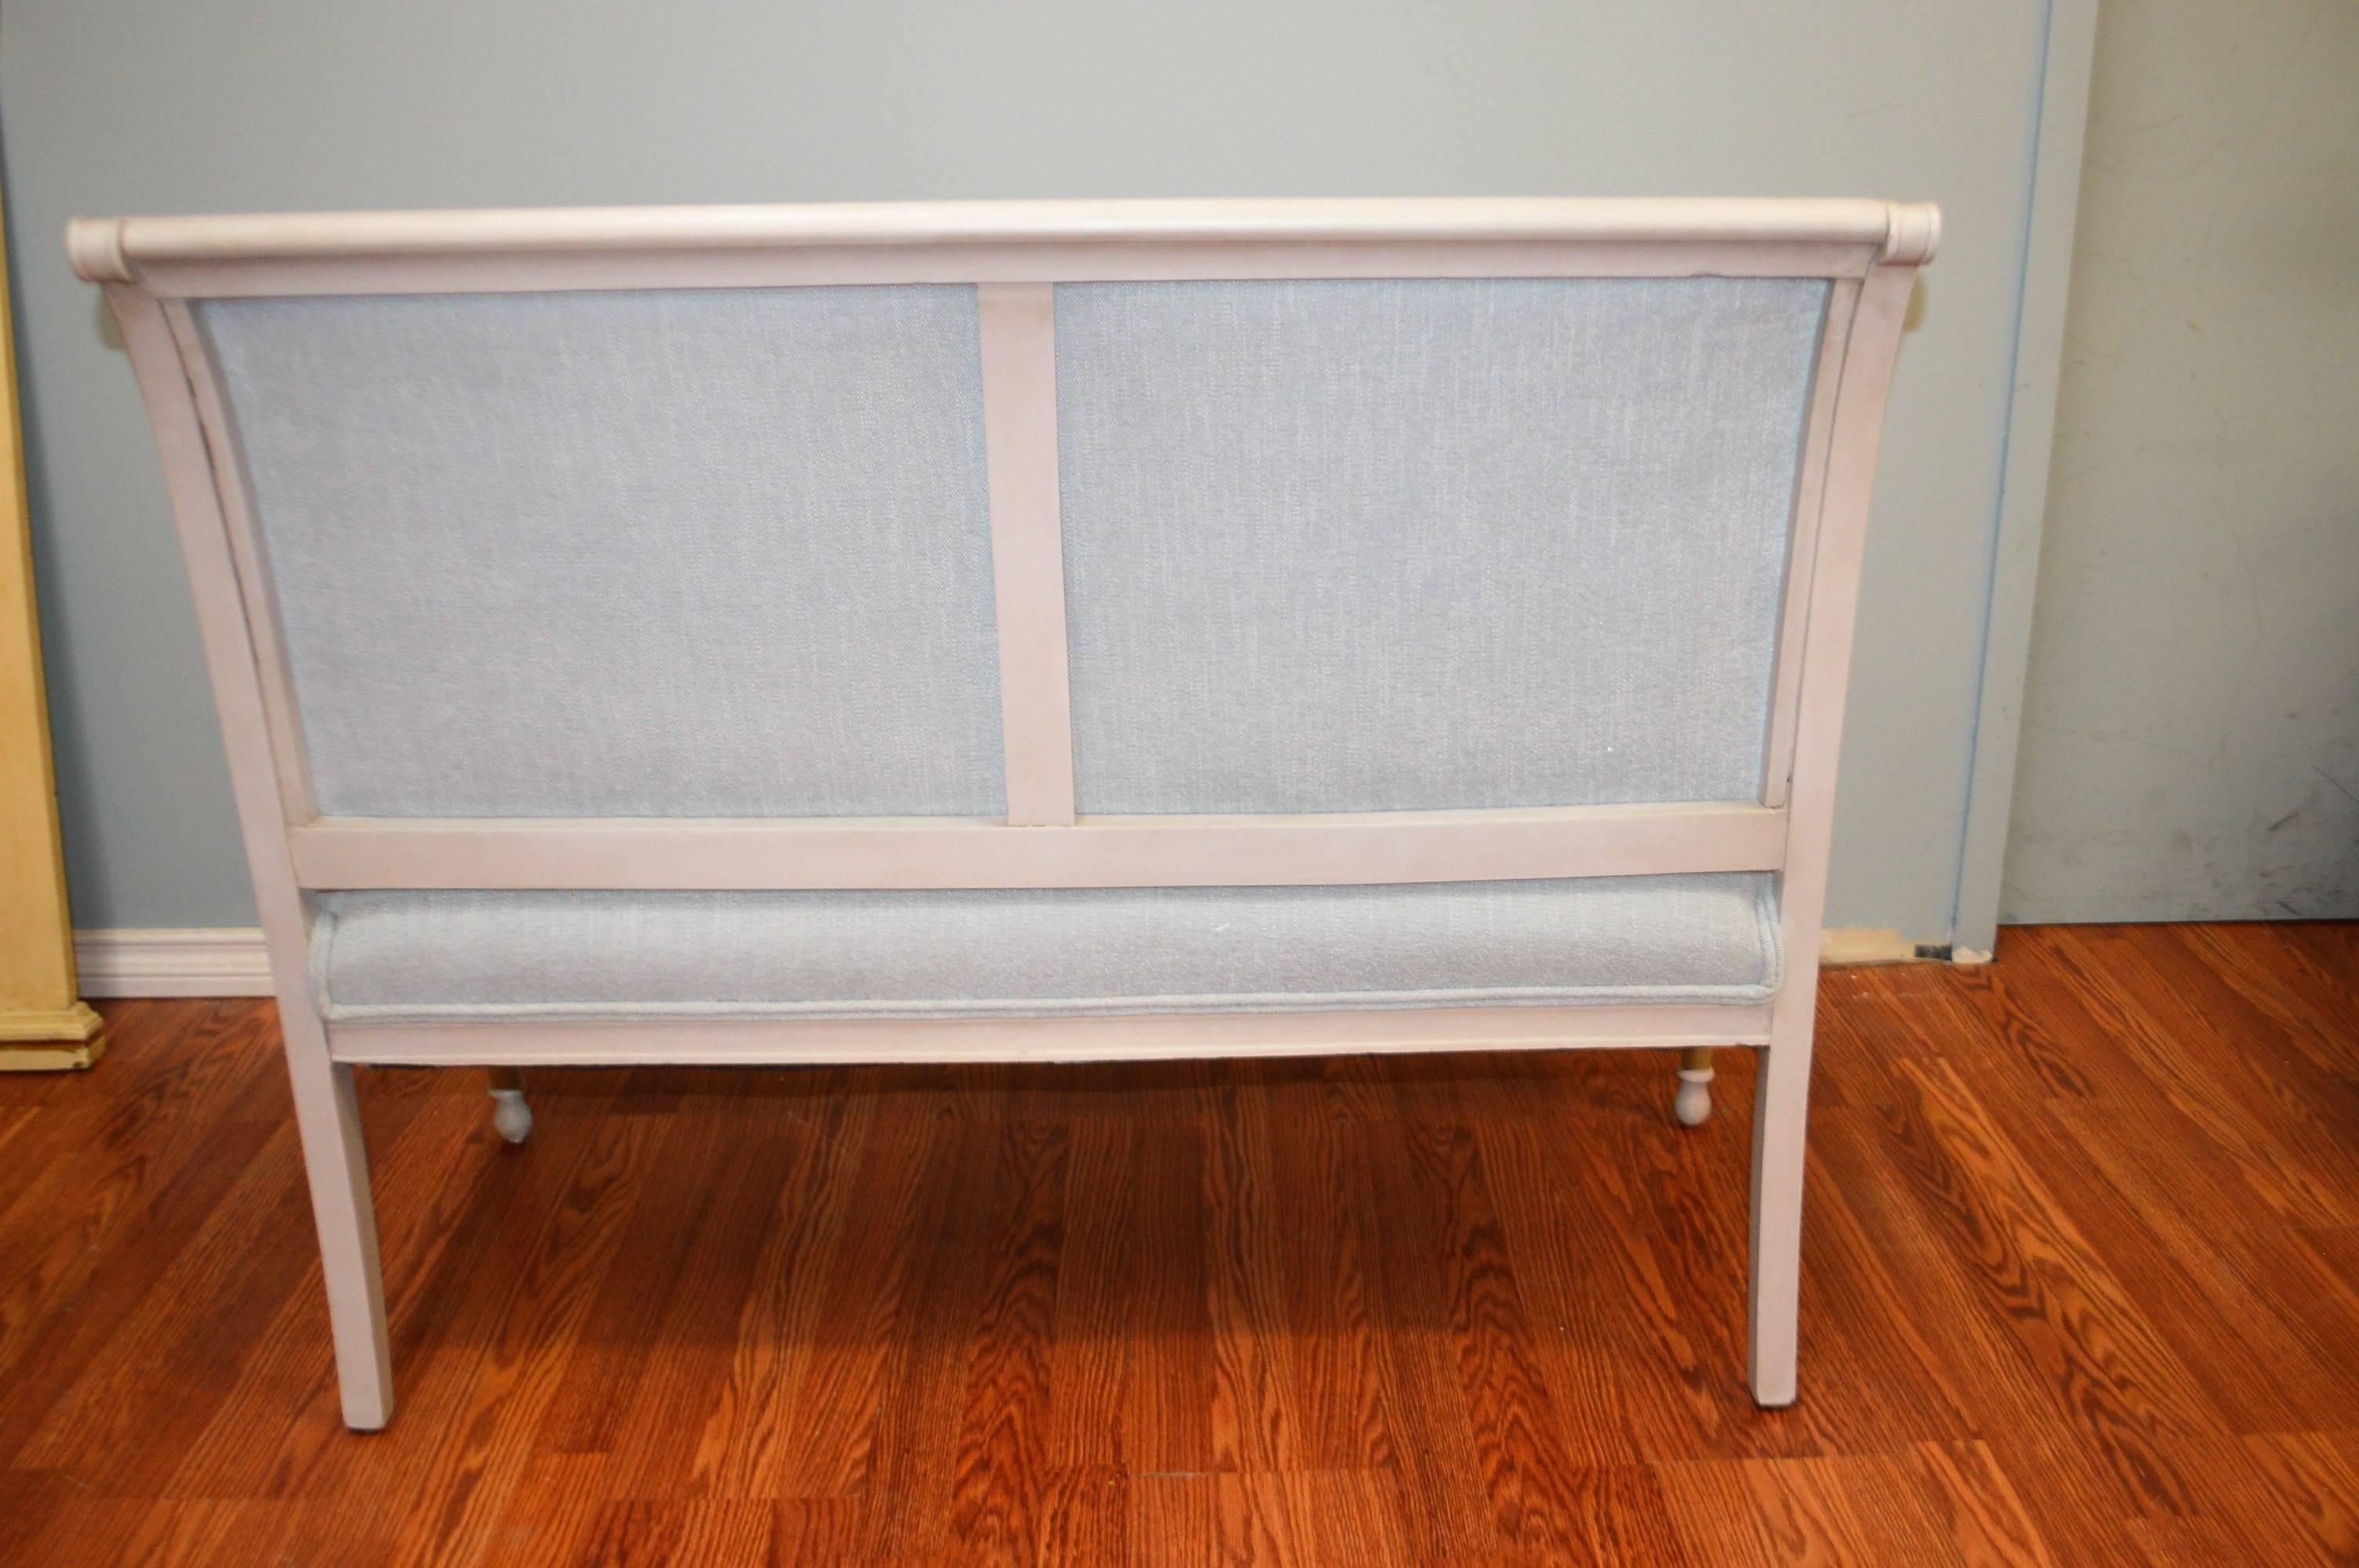 Gustavian Style Painted Settee, Canape, Newly Upholstered in a Light Blue Linen 3